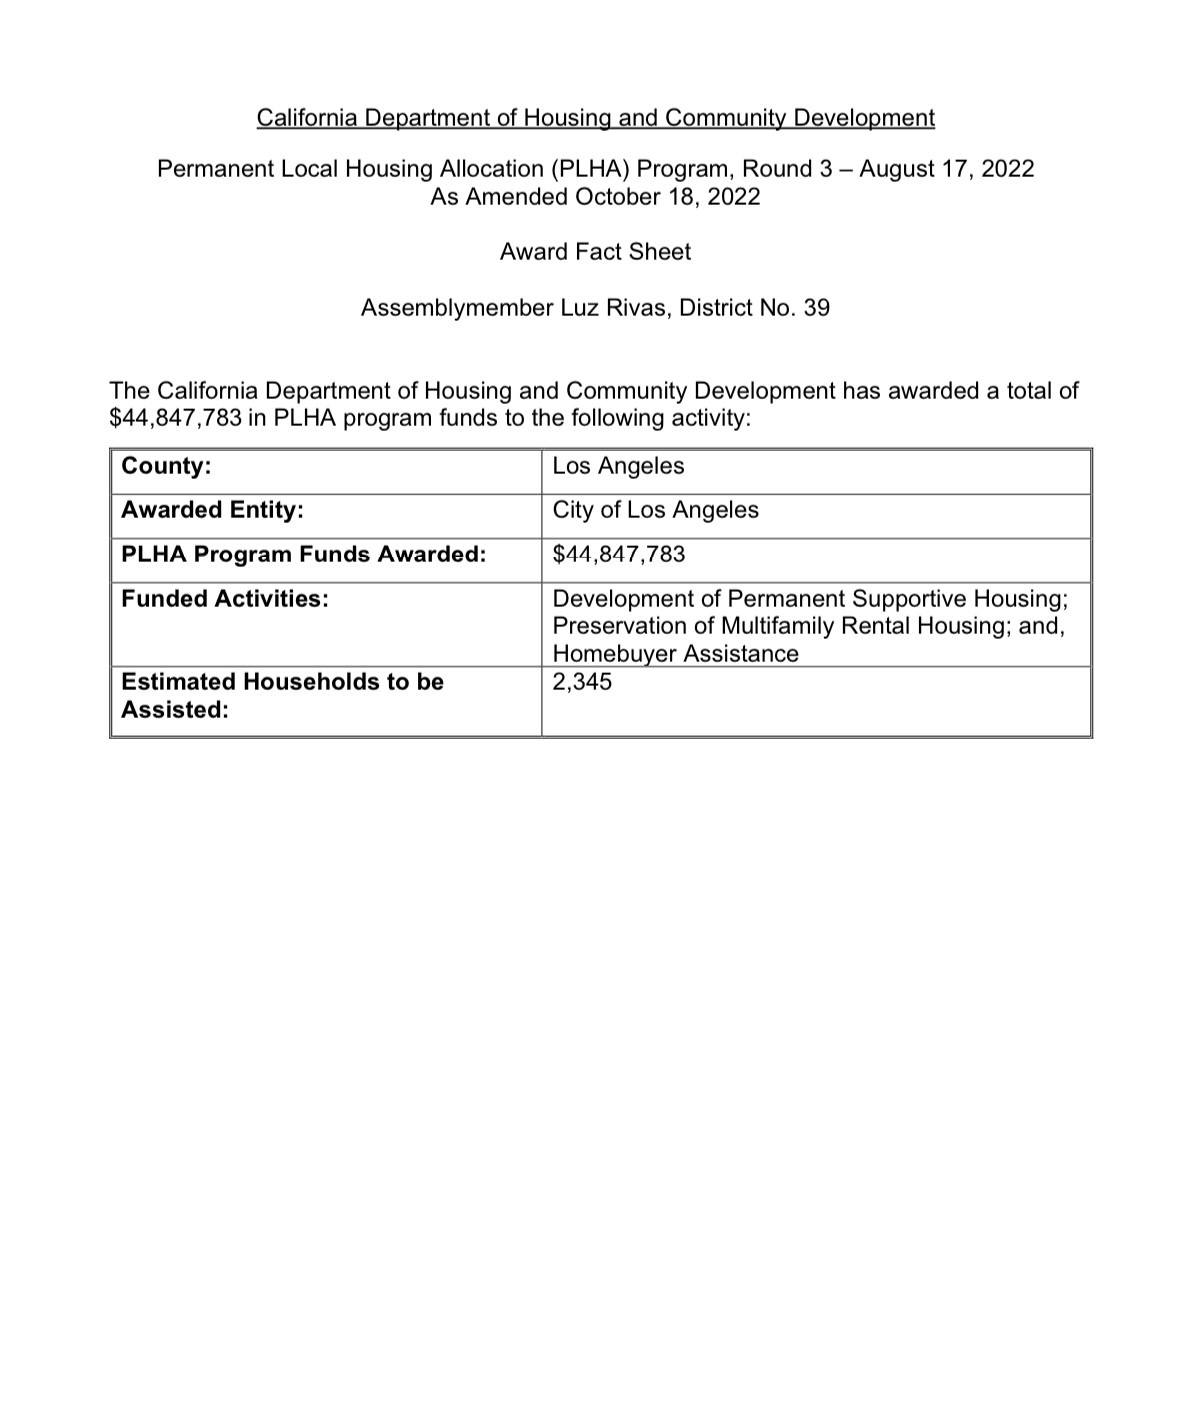 AD39 Awarded $44,847,783 from the California Department of Housing